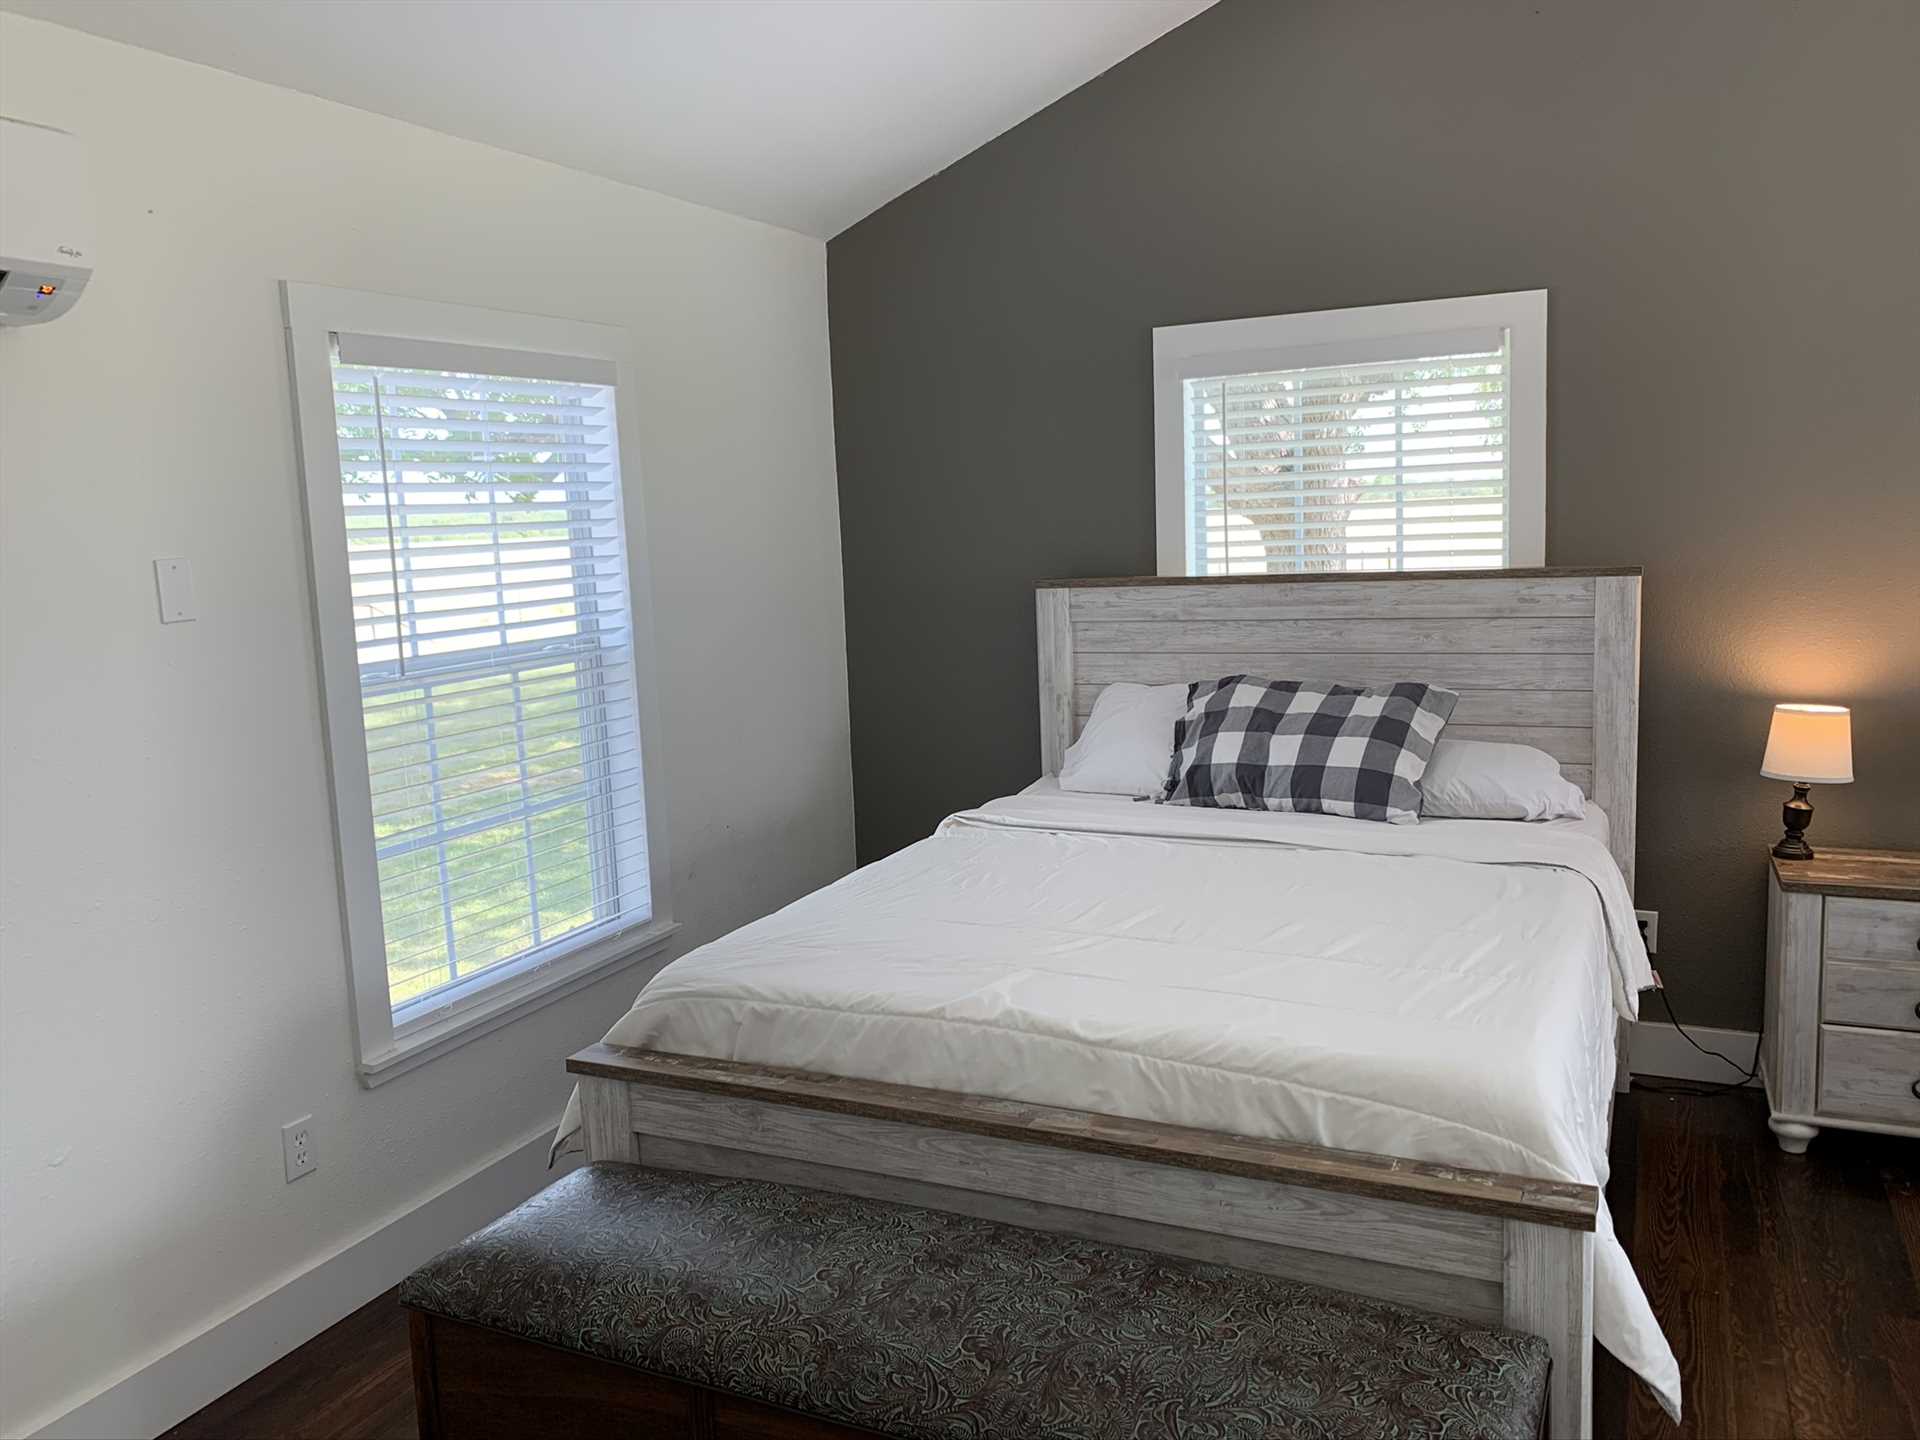                                                 All the bedrooms and bathrooms in the Retreat include clean and fresh liens for your comfort and convenience.